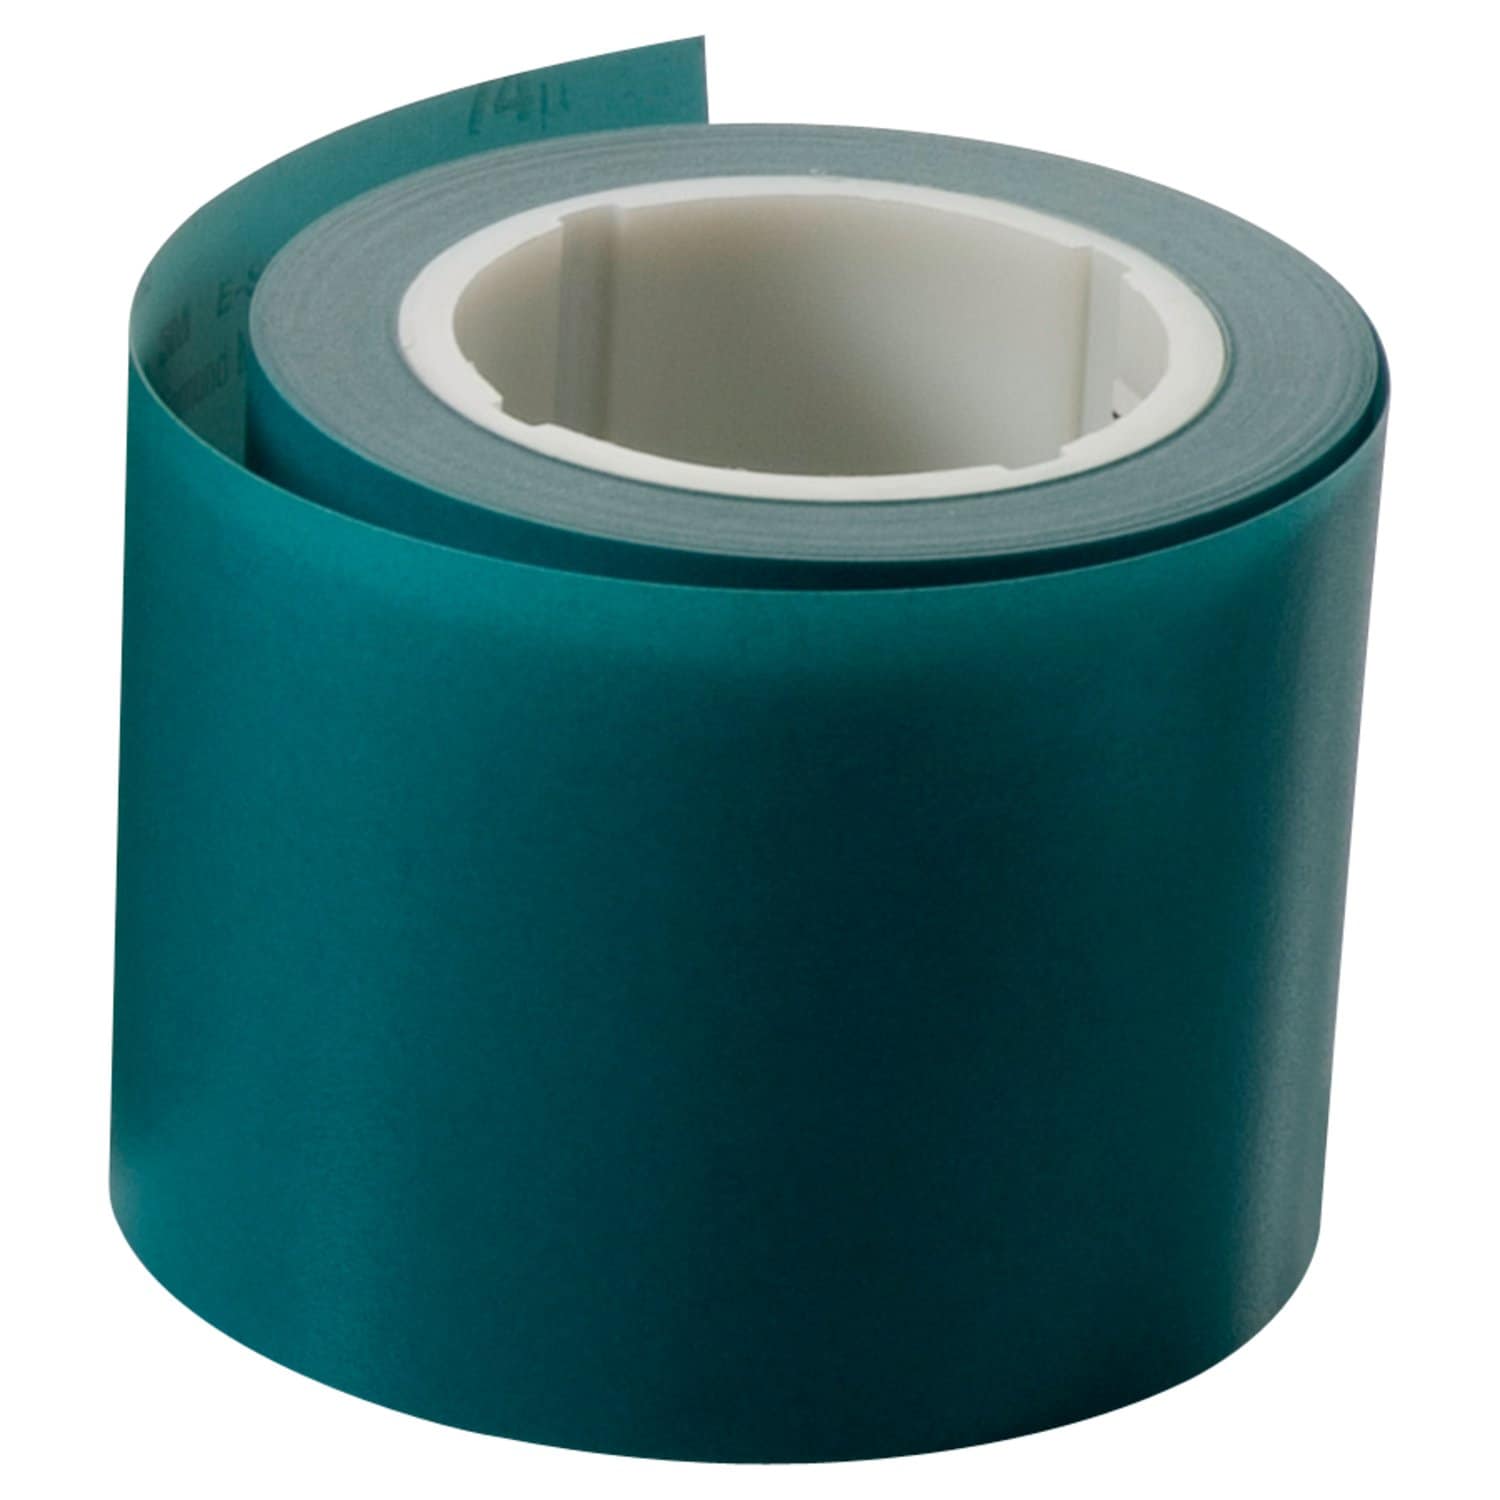 7010360675 - 3M Microfinishing Film Roll 373L, 30 Mic 5MIL, 0.669 in x 300 ft x .787 in (16.99mmx91.5m), ASO, End Roll Mark Red